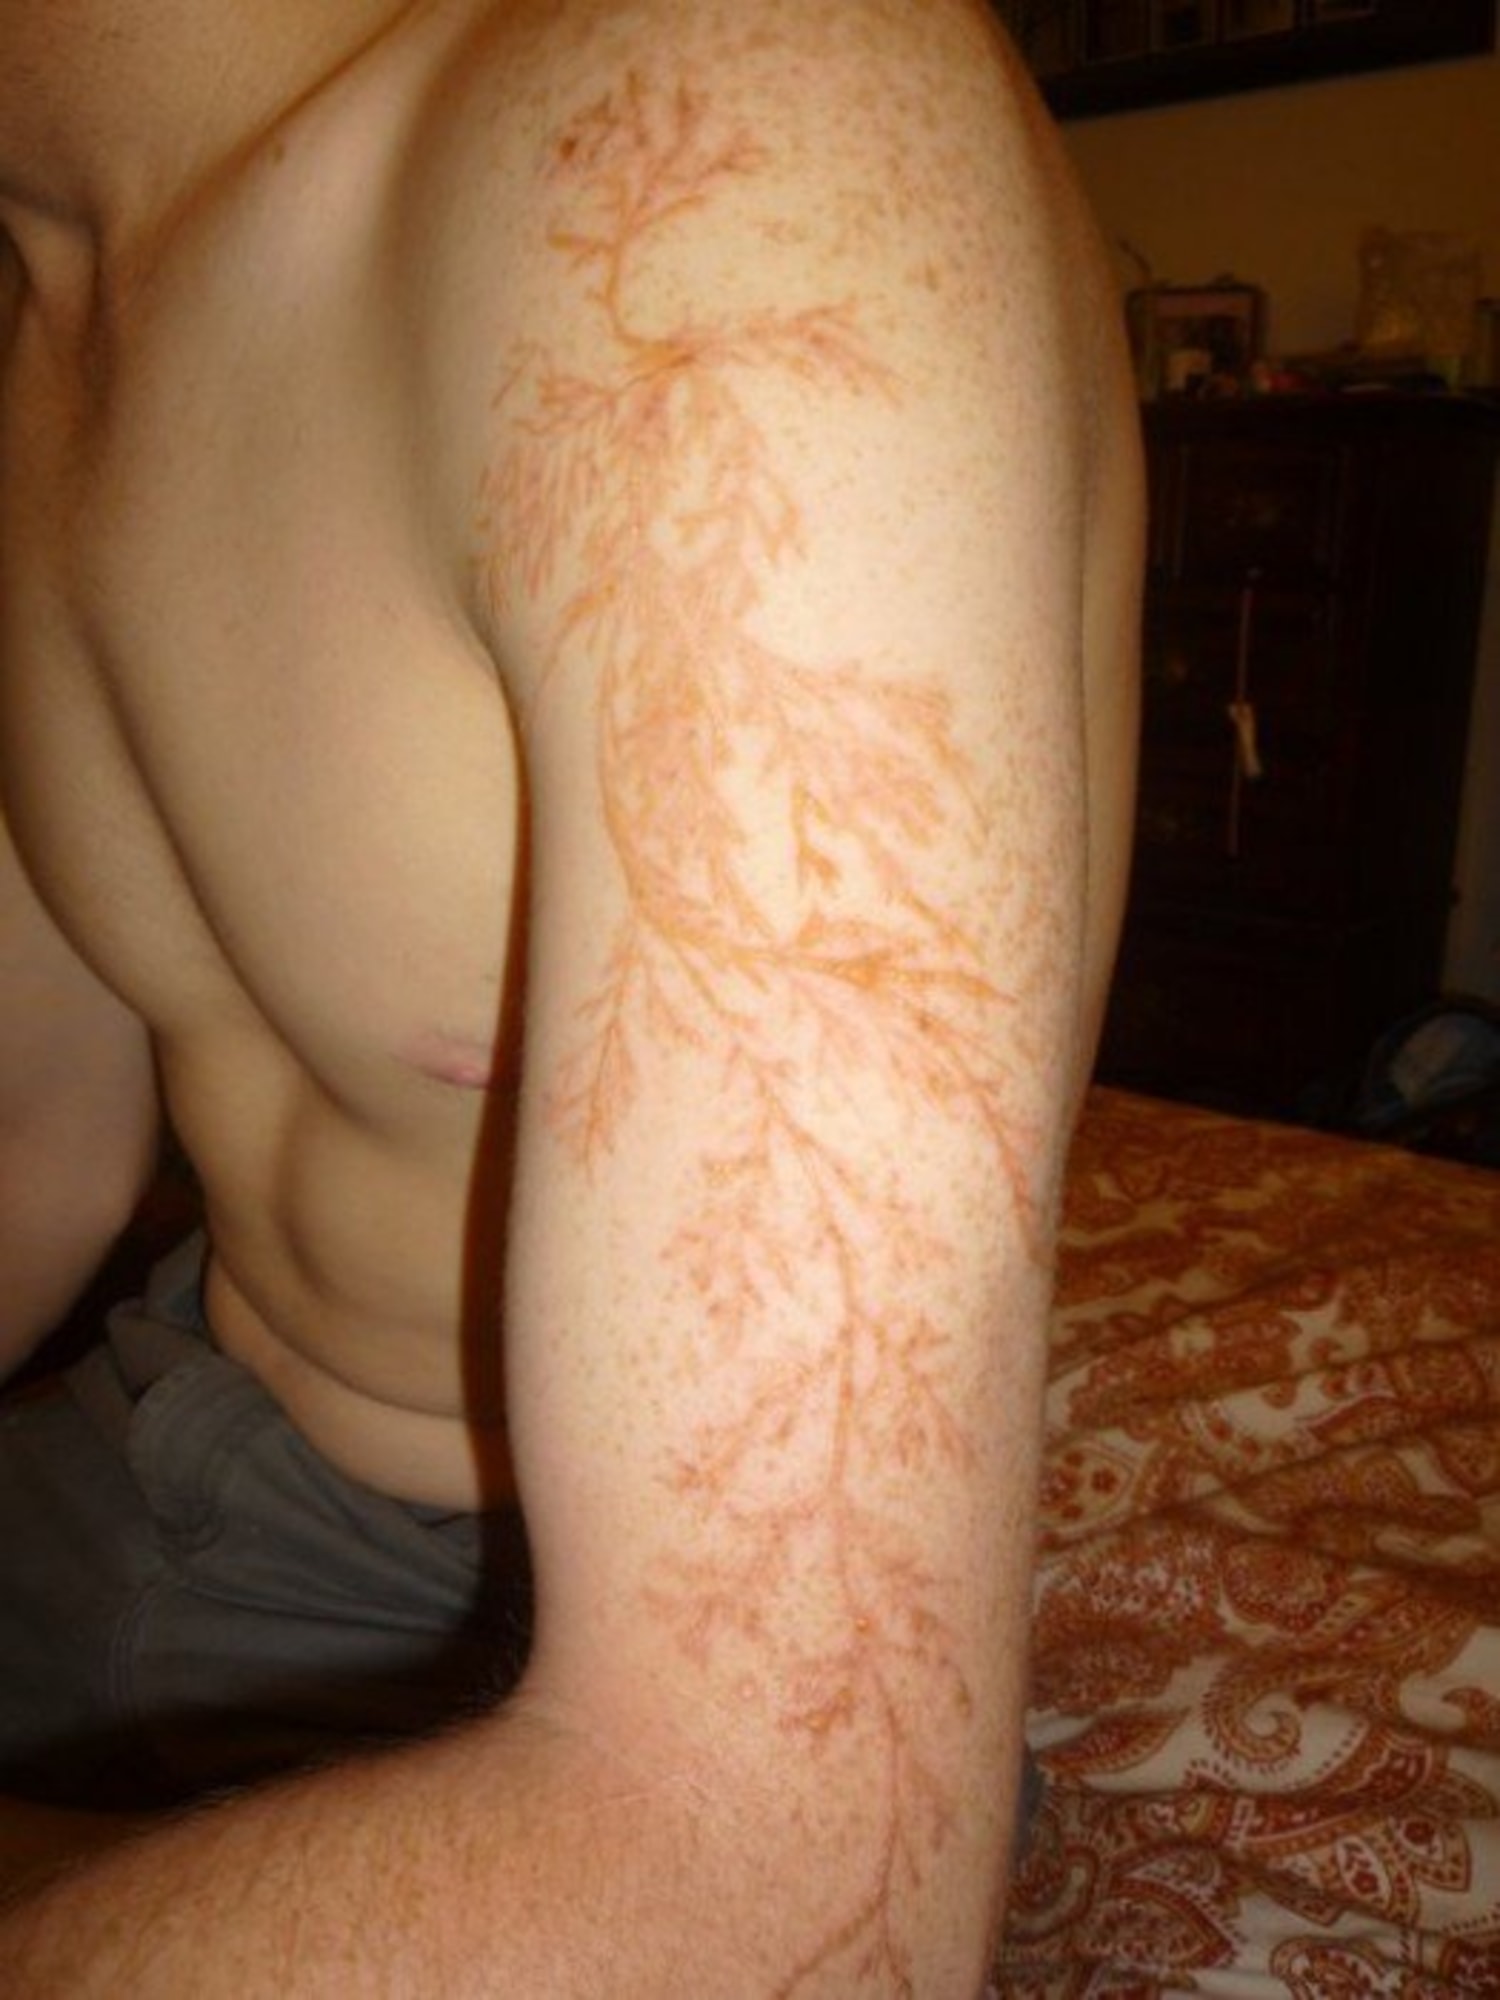 Here's what a lightning strike can do to your skin